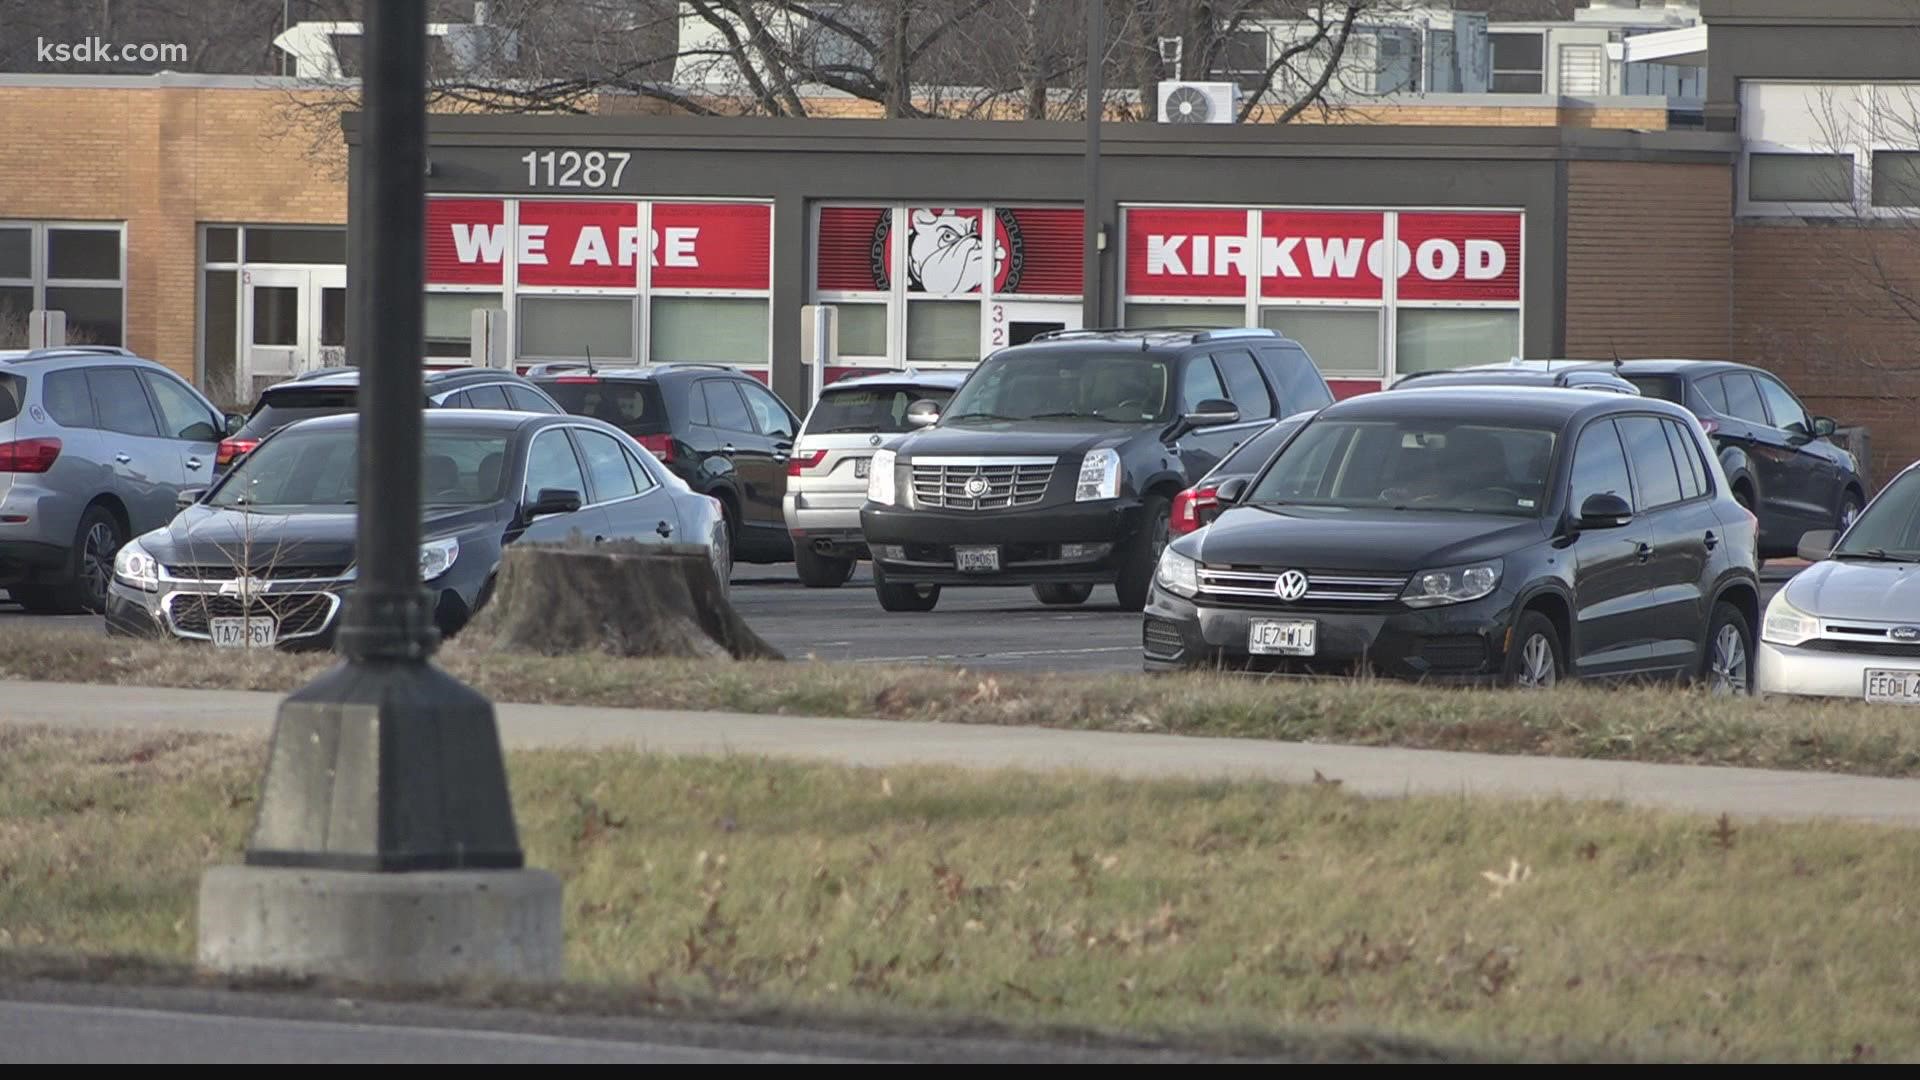 The Nathaniel Reid Bakery worker said he was walking from the nearby North Kirkwood Middle School parking lot when three men pointed guns at him.